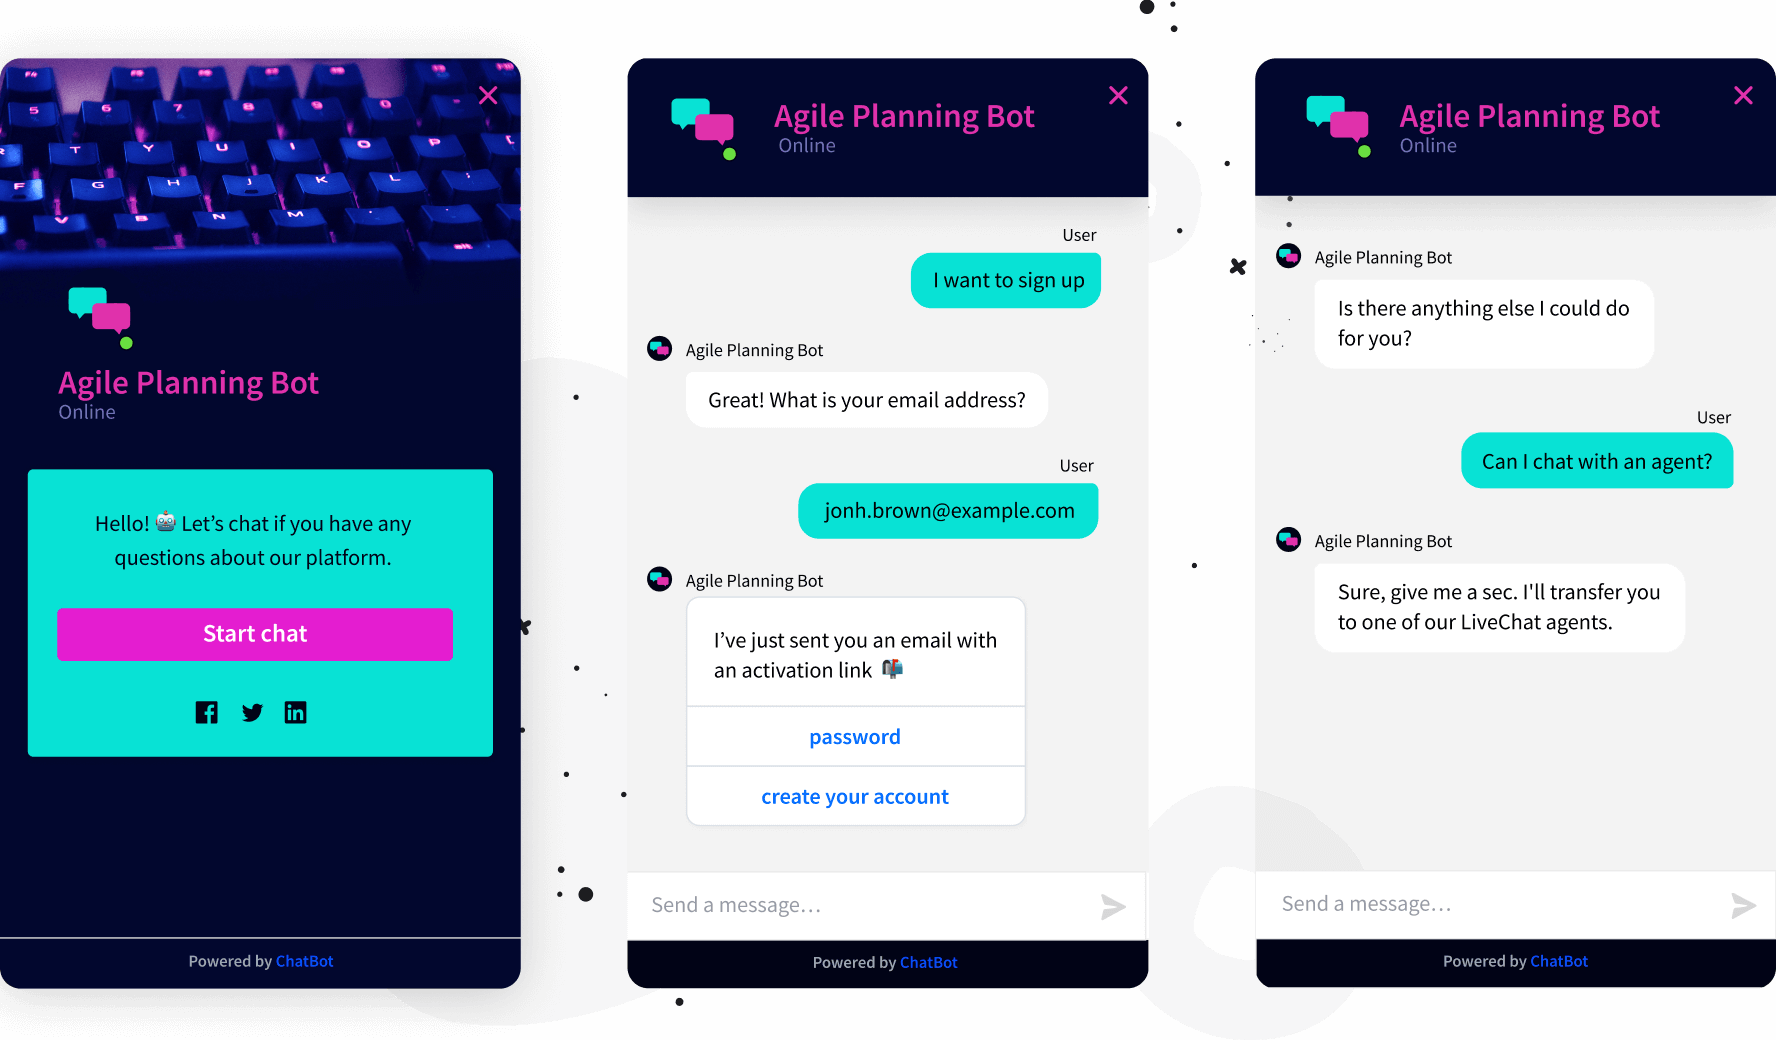 The gallery of chatbots